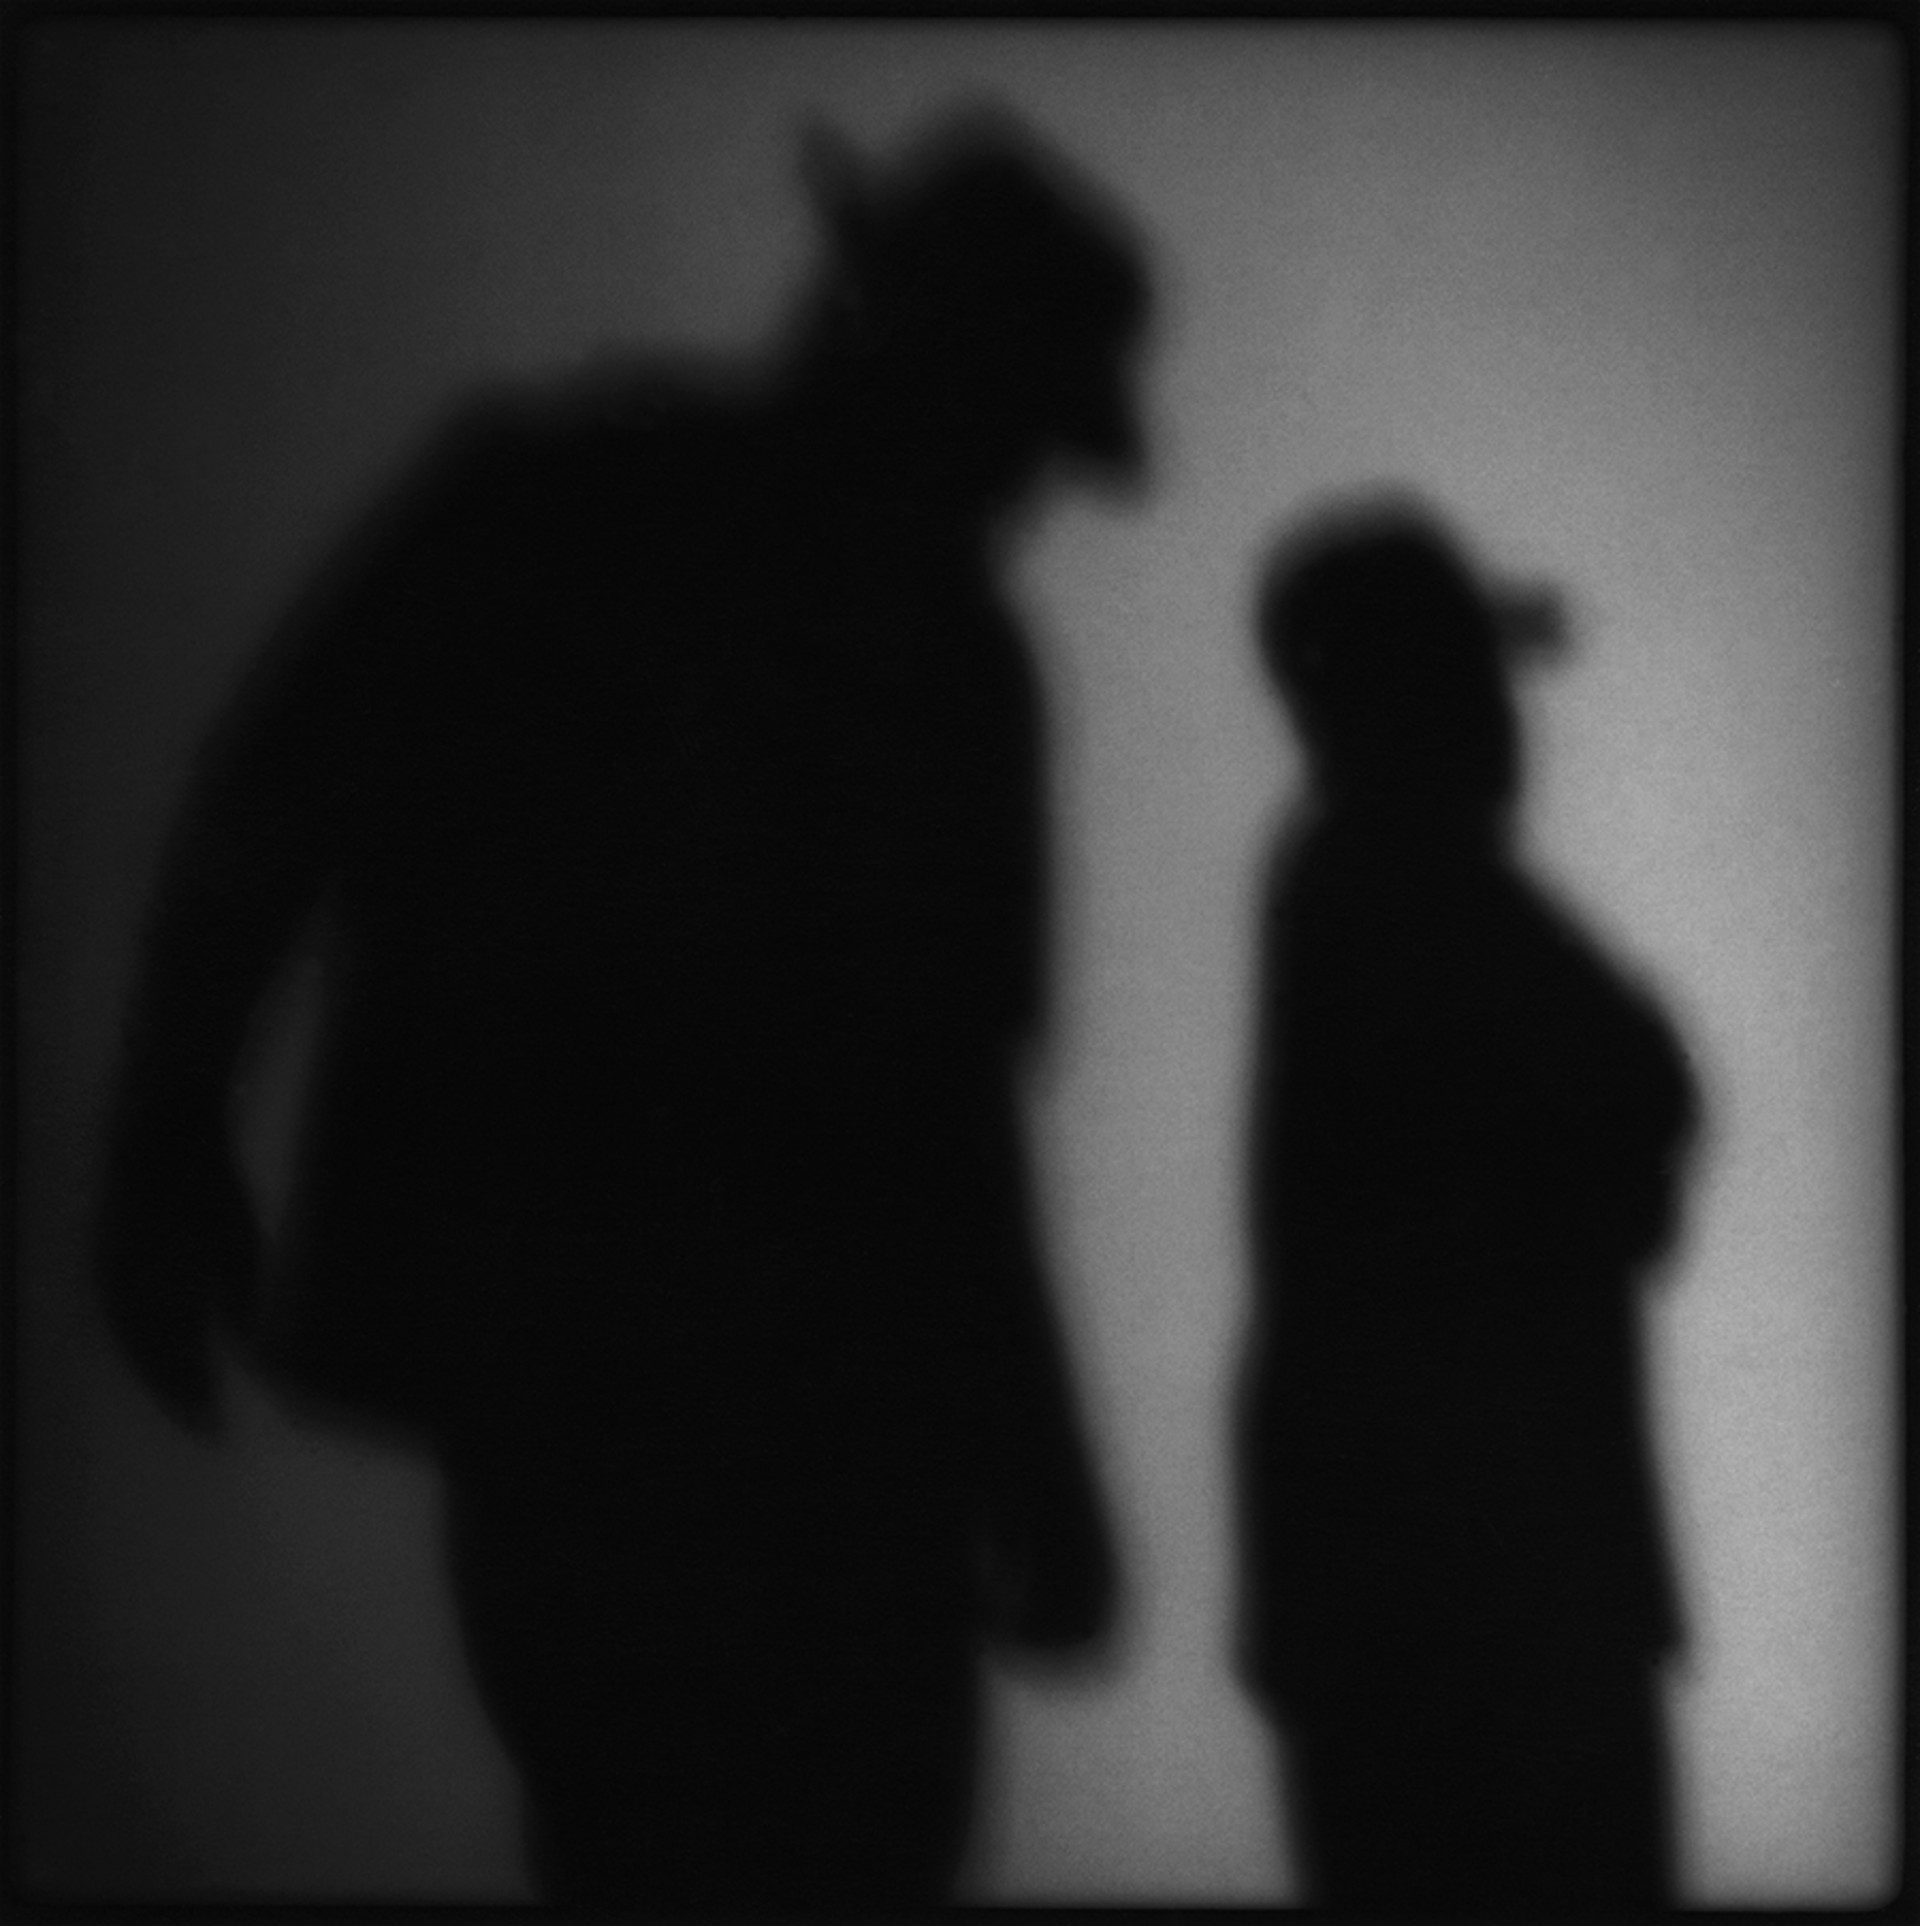 94026 Outkast Shadows BW, 1994 by Timothy White